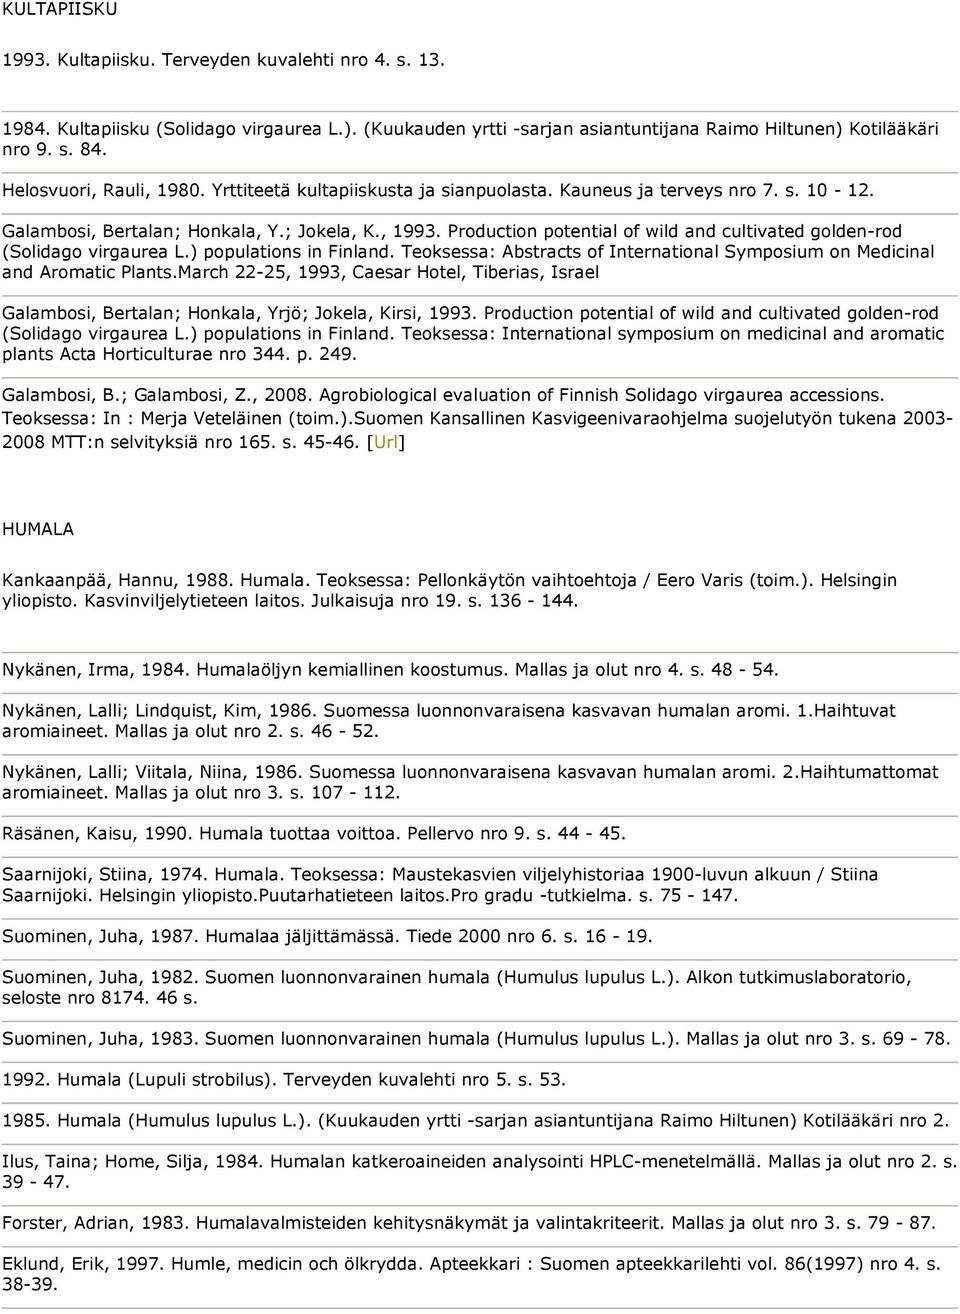 Production potential of wild and cultivated golden-rod (Solidago virgaurea L.) populations in Finland. Teoksessa: Abstracts of International Symposium on Medicinal and Aromatic Plants.